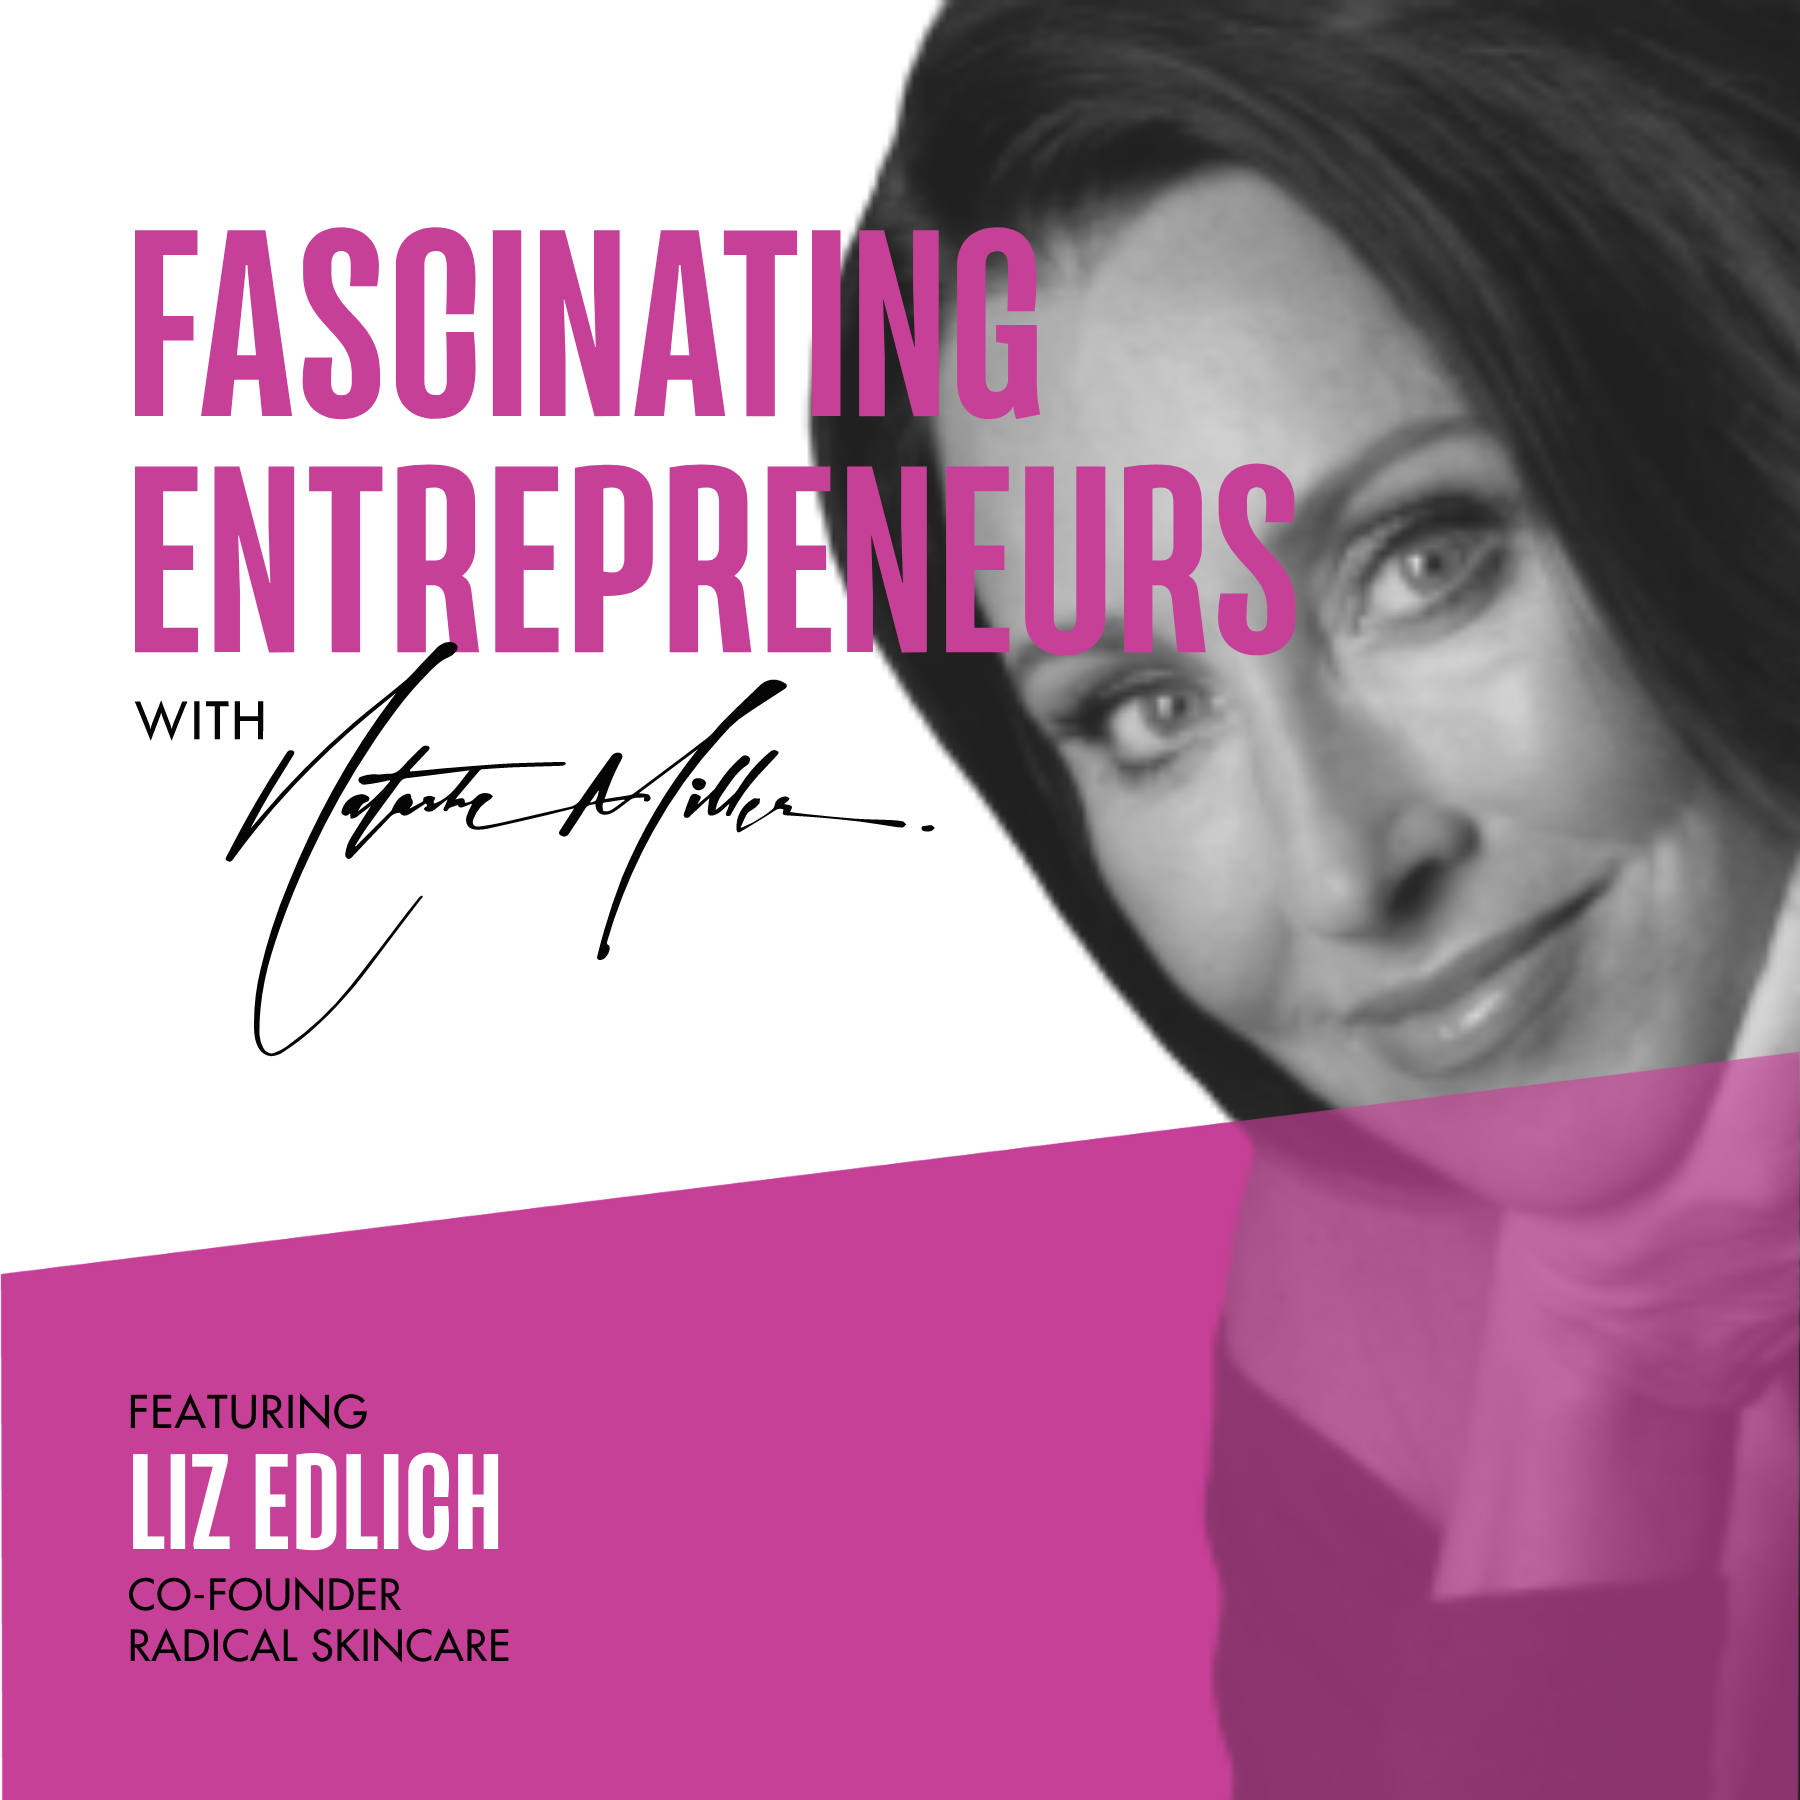 What Inspired Liz Edlich To Start A Skincare Company Ep. 52 Image